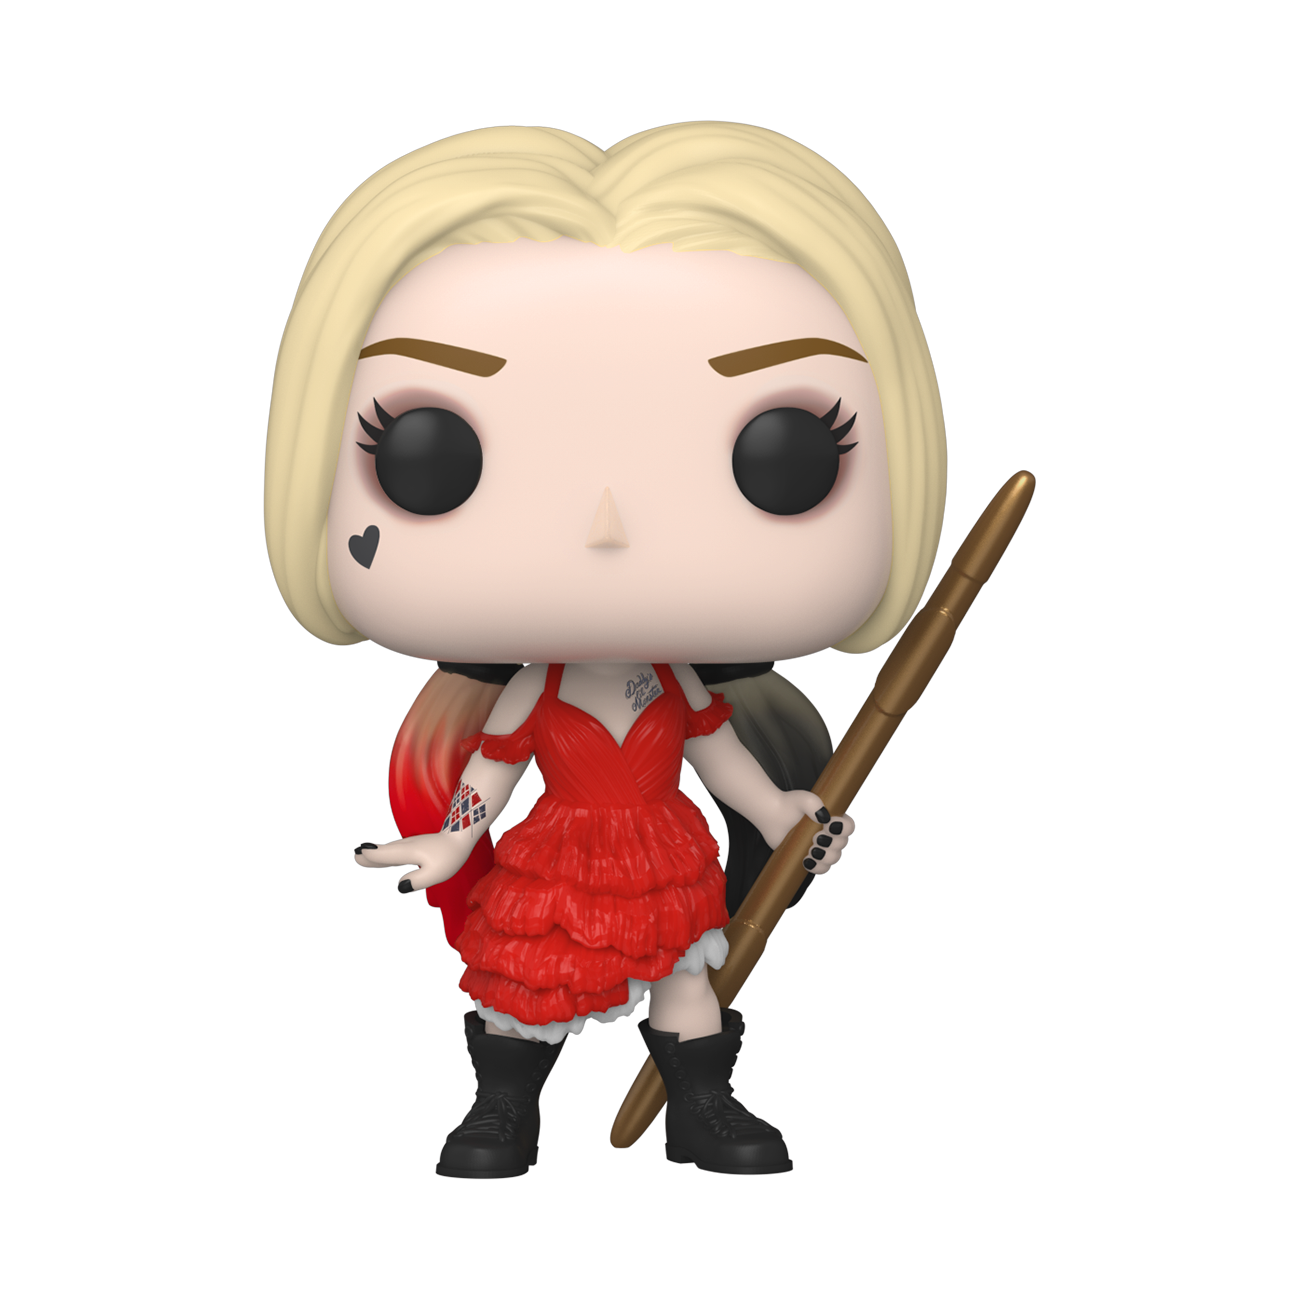 POP! Movies: The Suicide Squad - Harley Quinn (Damaged Dress)